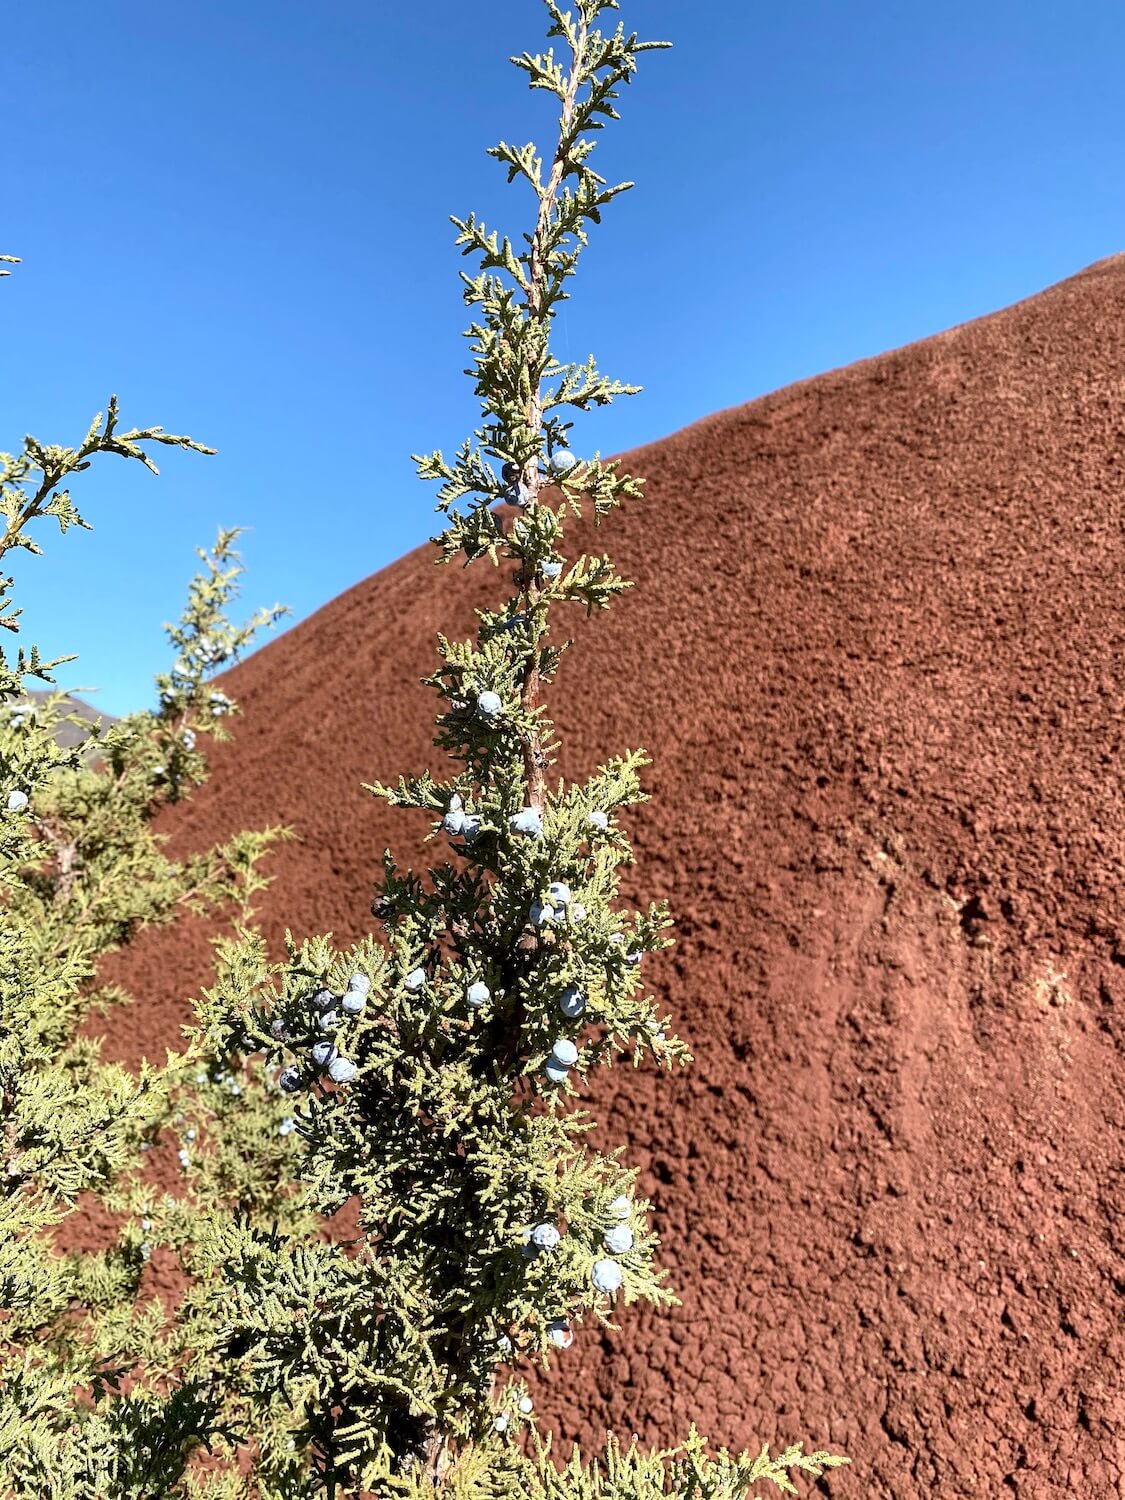 A lone juniper branch with blue berries pops up in front of the earthly red mound of the Painted Cove Trail under a bright blue sky.